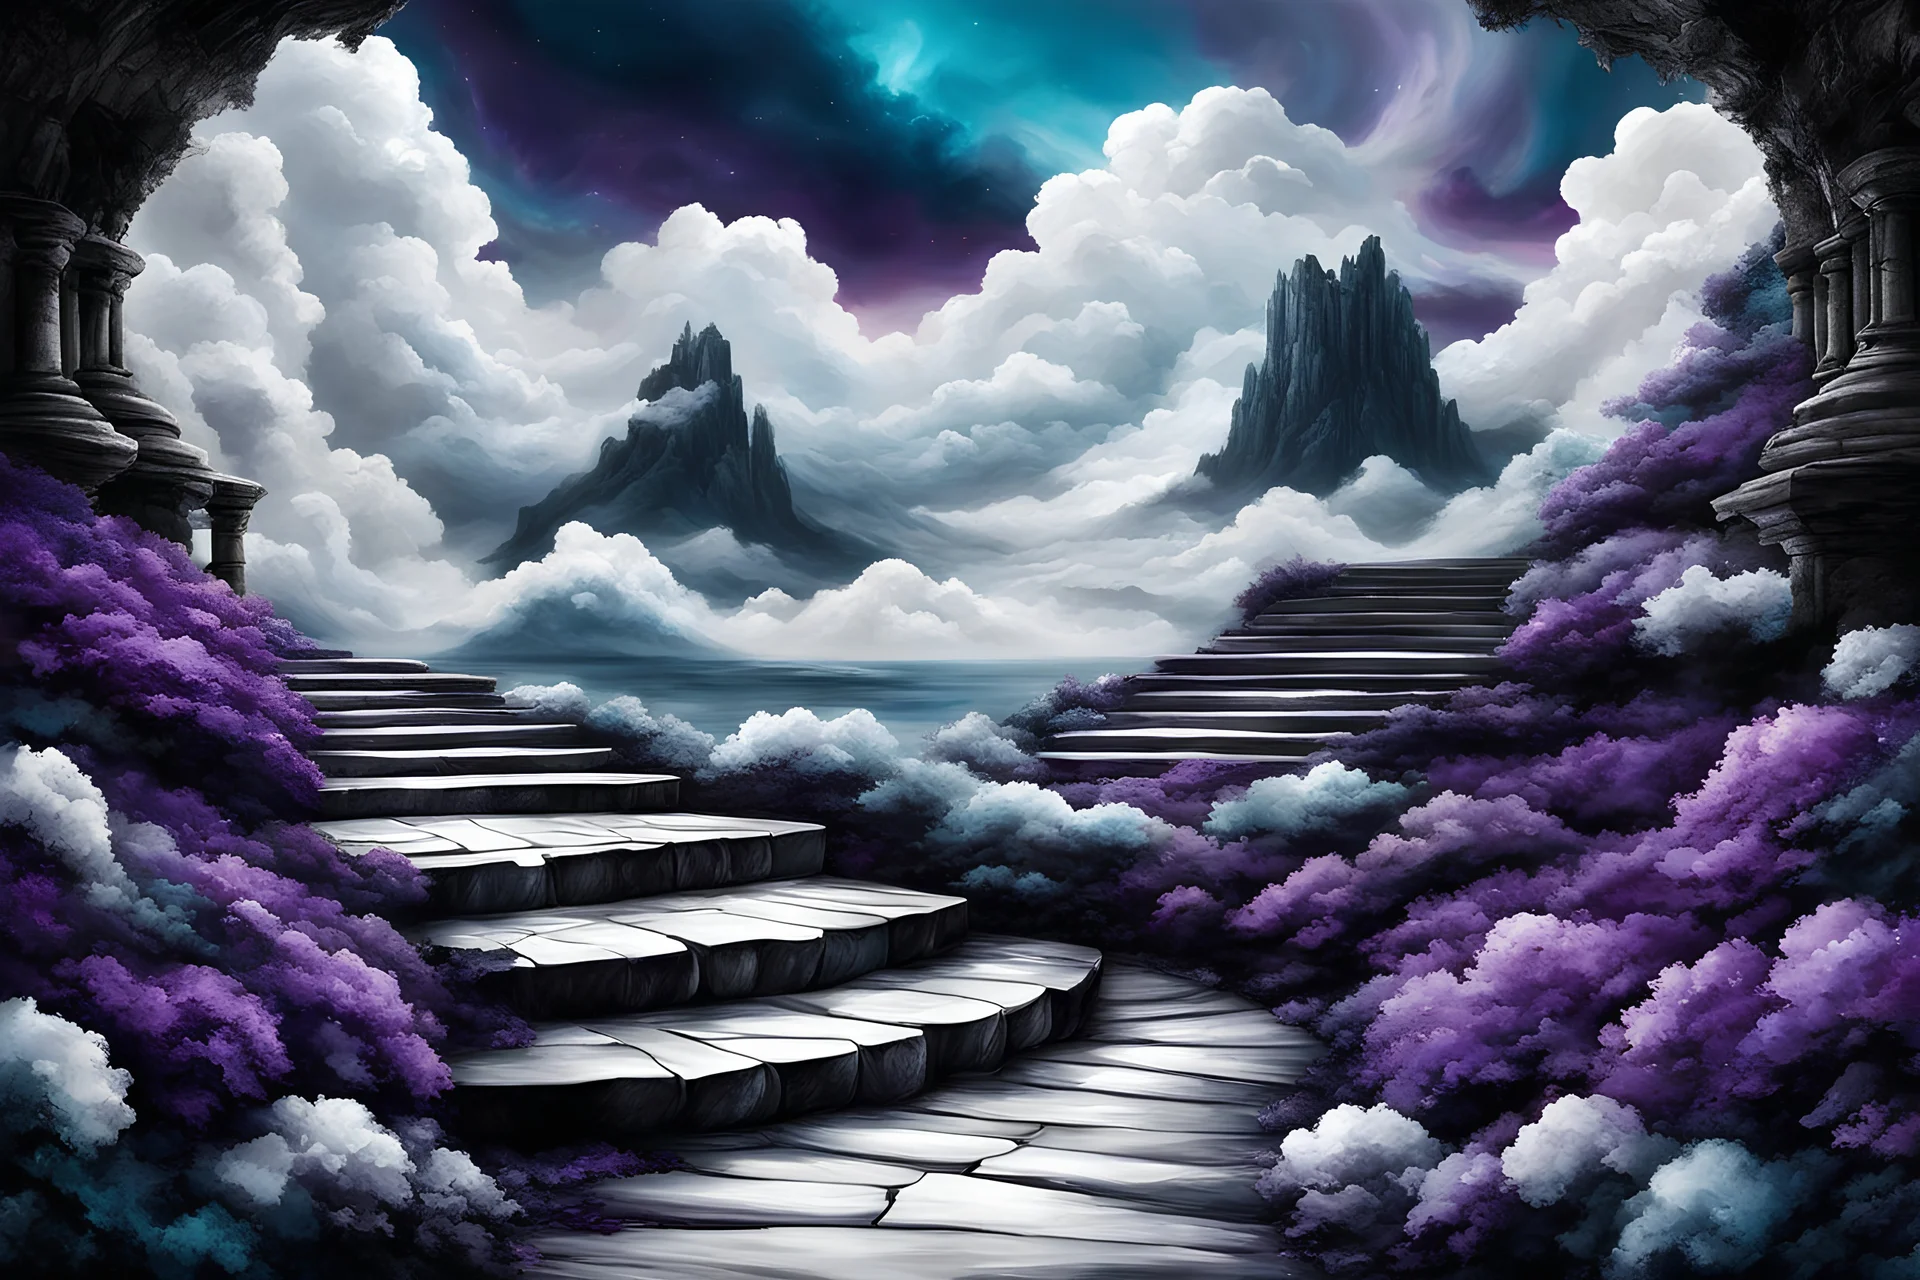 Gorgeous hyper realistic thick flowing oil paint style stamp spatula painting of a Heavily contrasted black white and alexandrite colour scheme. dream being formed, arch to dreamland visible. fantasy landscape with beautiful fluffy clouds and sky critters on the other side, rows of cotton line staircase to the sky.. Beautiful jagged shapes creating a perfect centred composition on the theme.